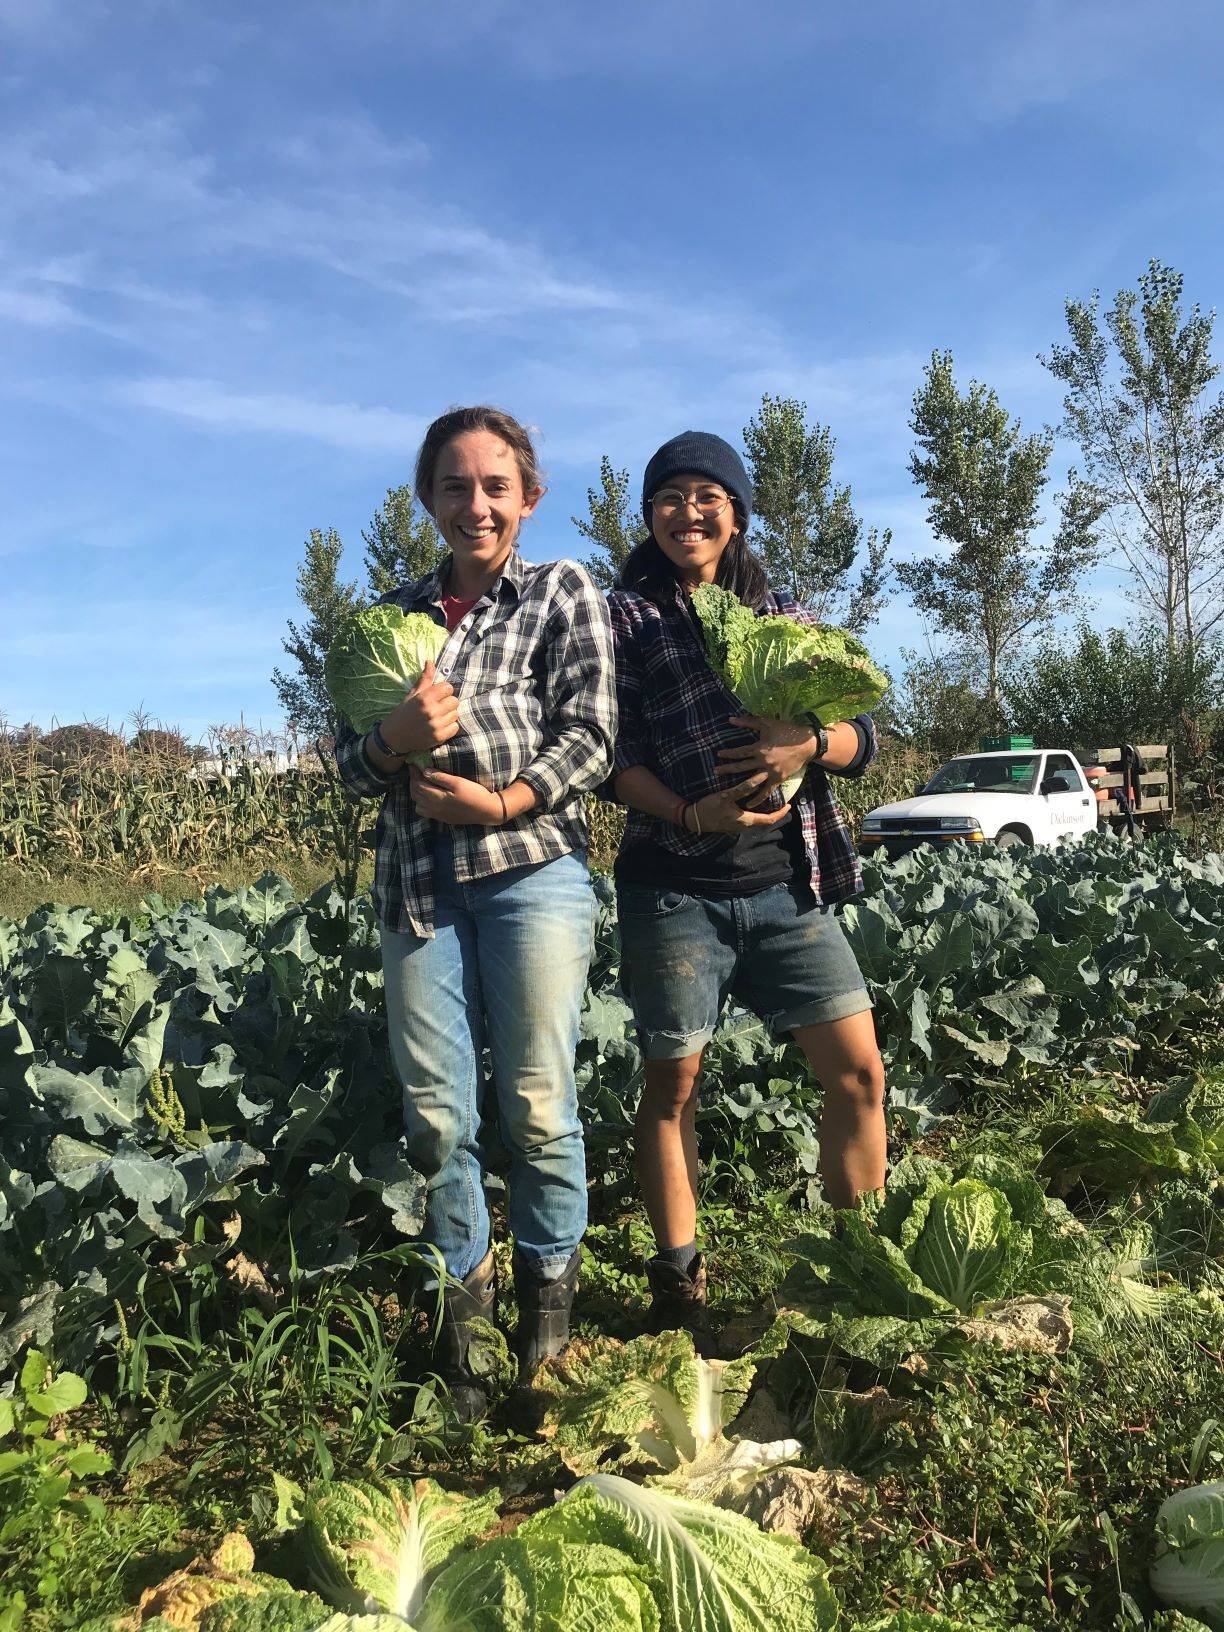 Tuesday CSA: Dickinson College Farm Field Notes for Week of September 30th